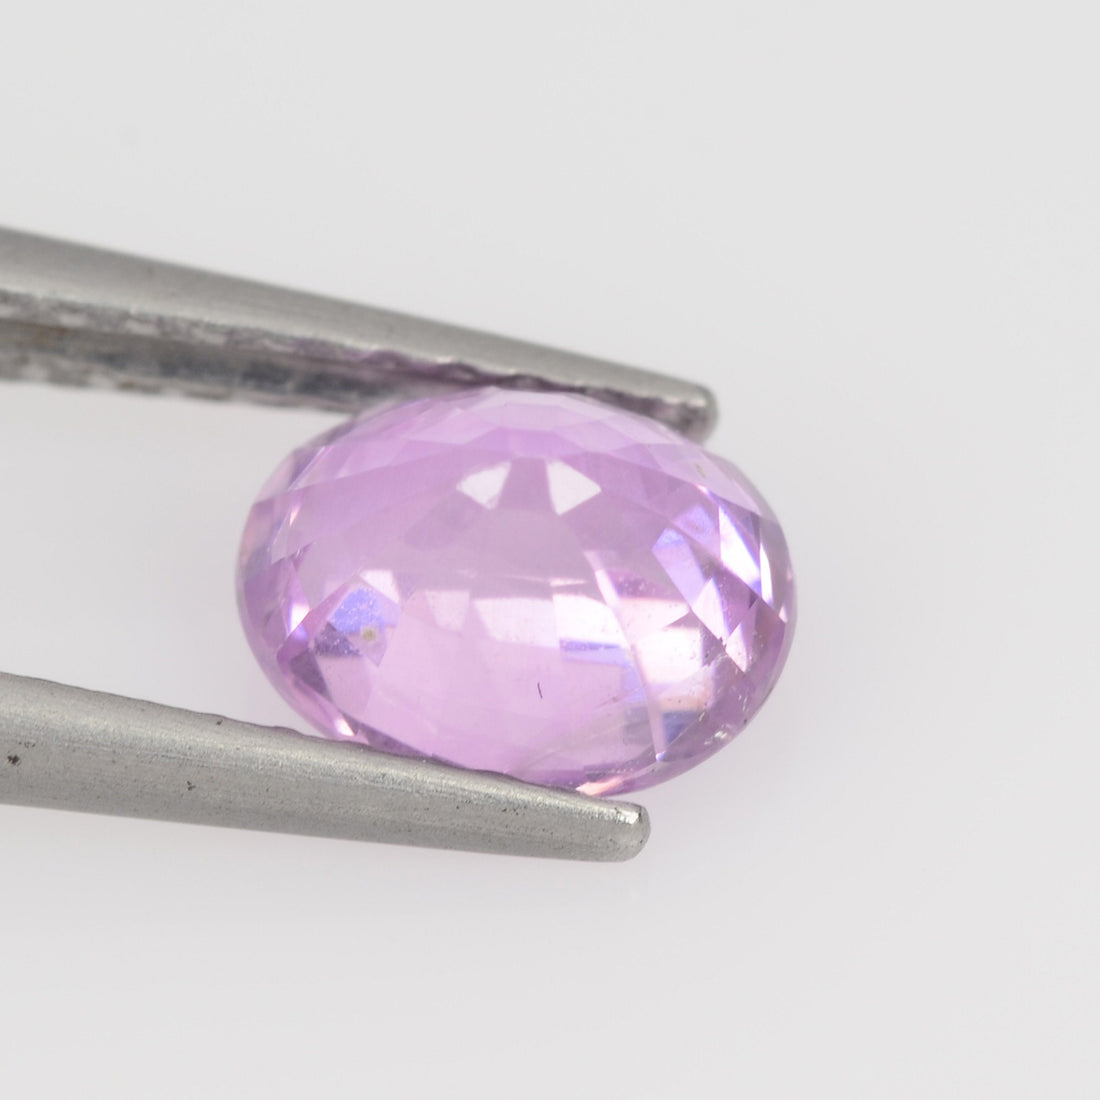 1.22 cts Natural Pink Sapphire Loose Gemstone Oval Cut